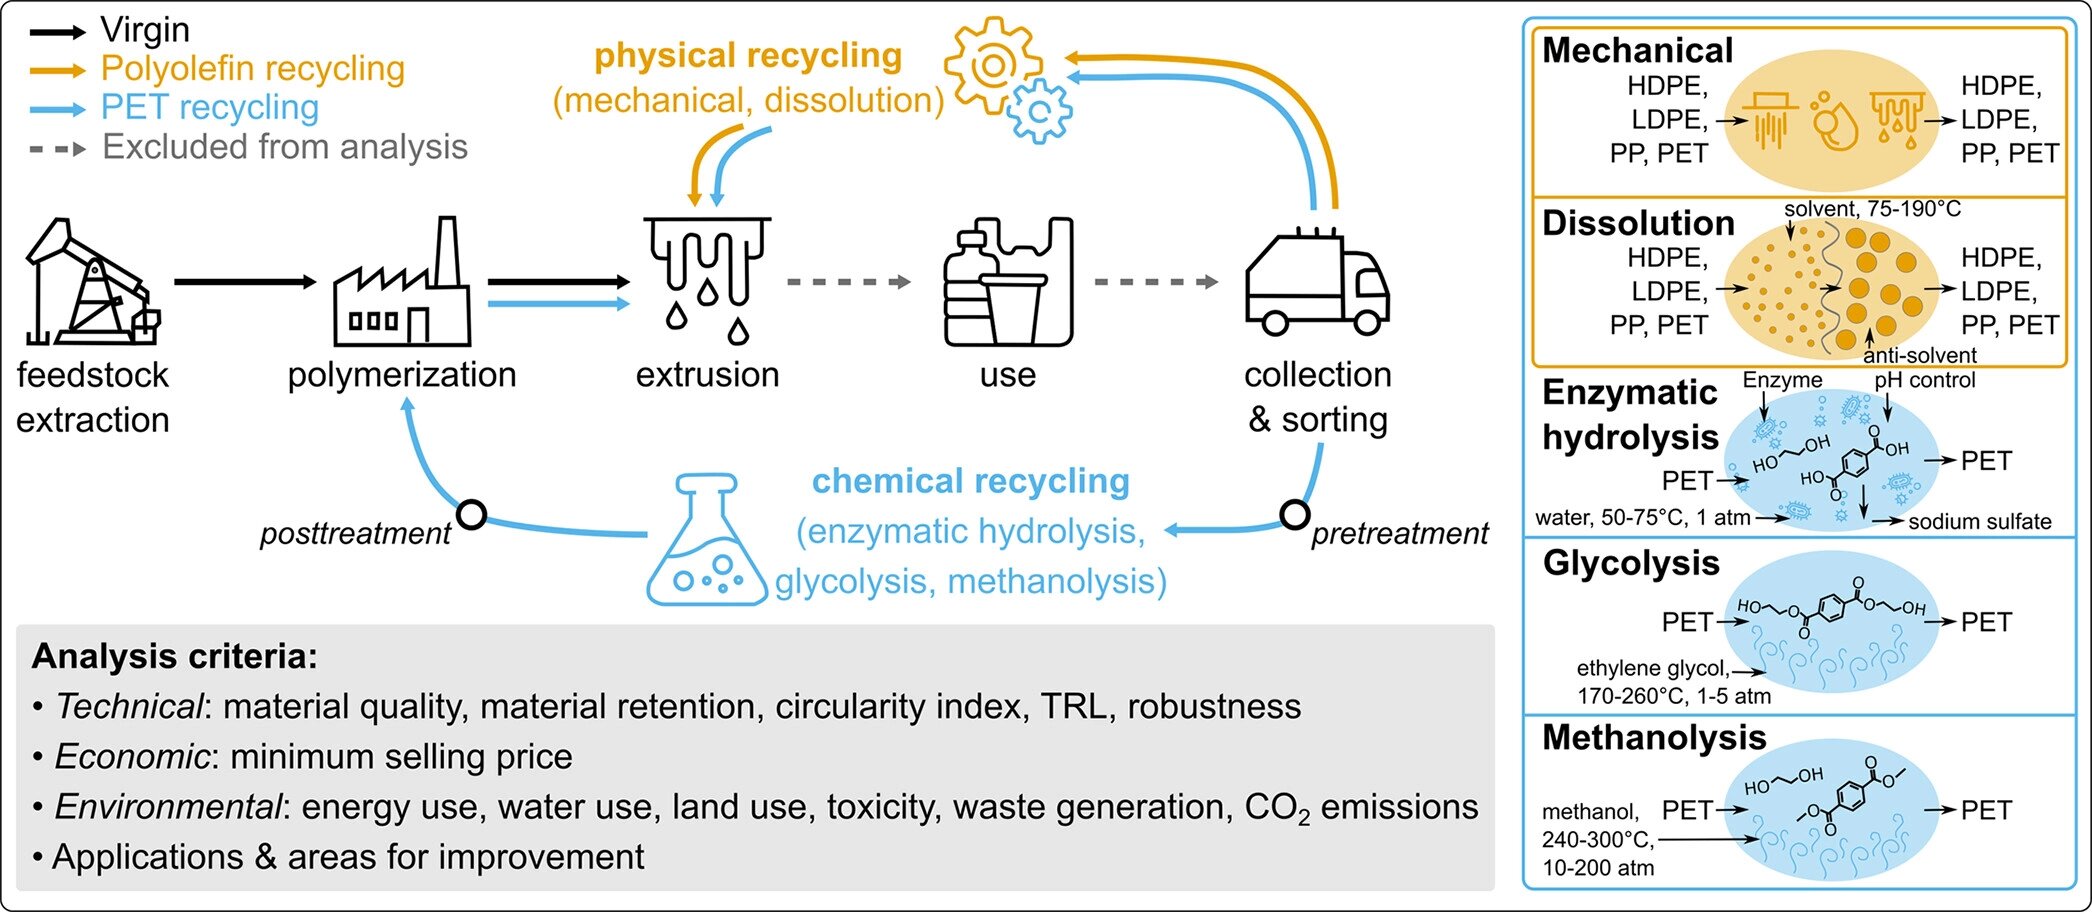 A systematic framework to compare performance of plastics recycling approaches